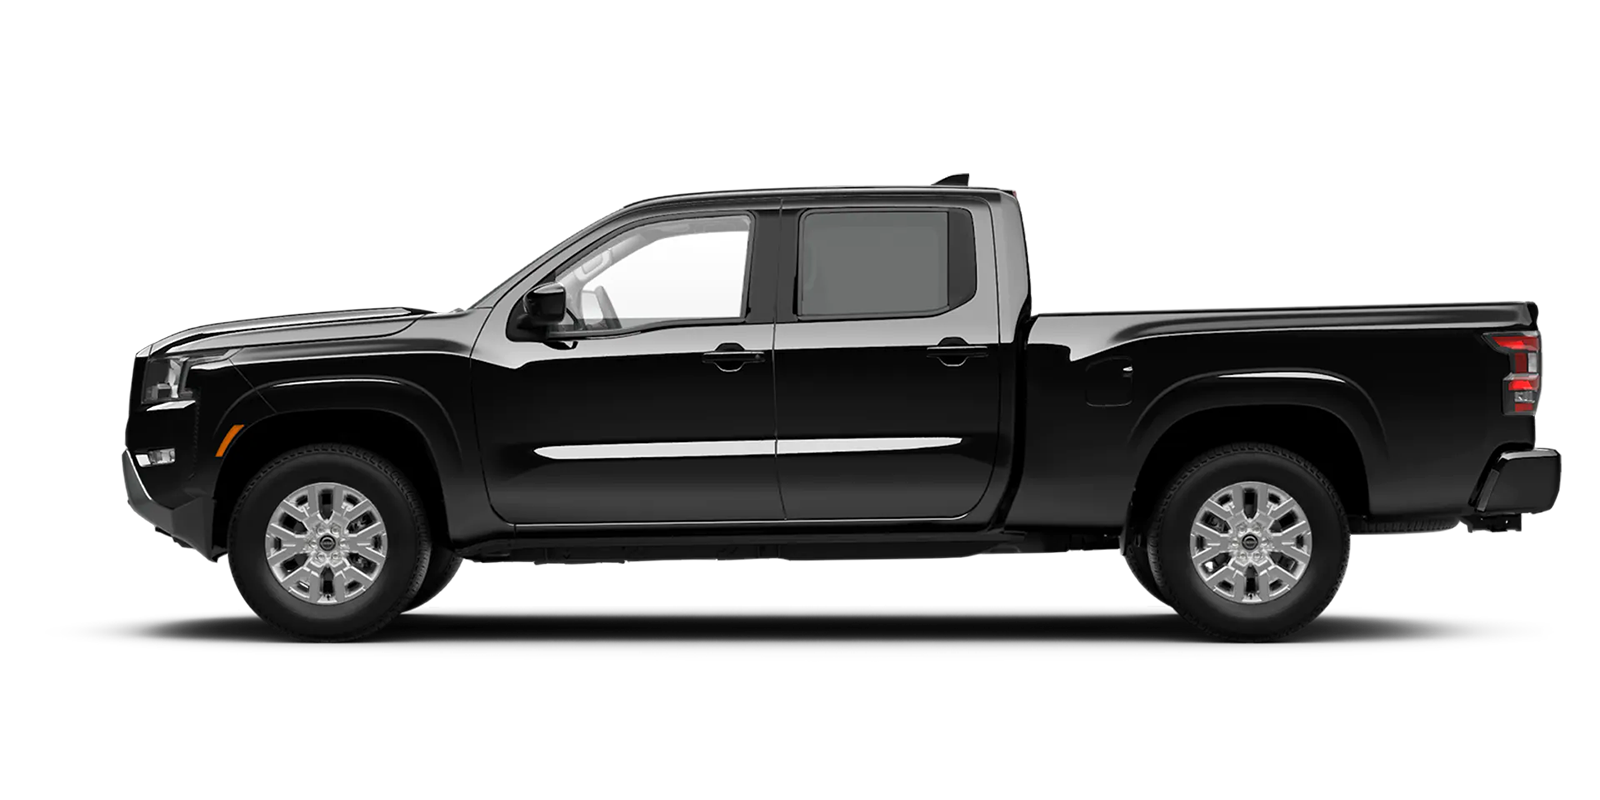 2022 Frontier Crew Cab Long Bed SV 4x4 in Super Black | Greenway Nissan of Florence in Florence AL